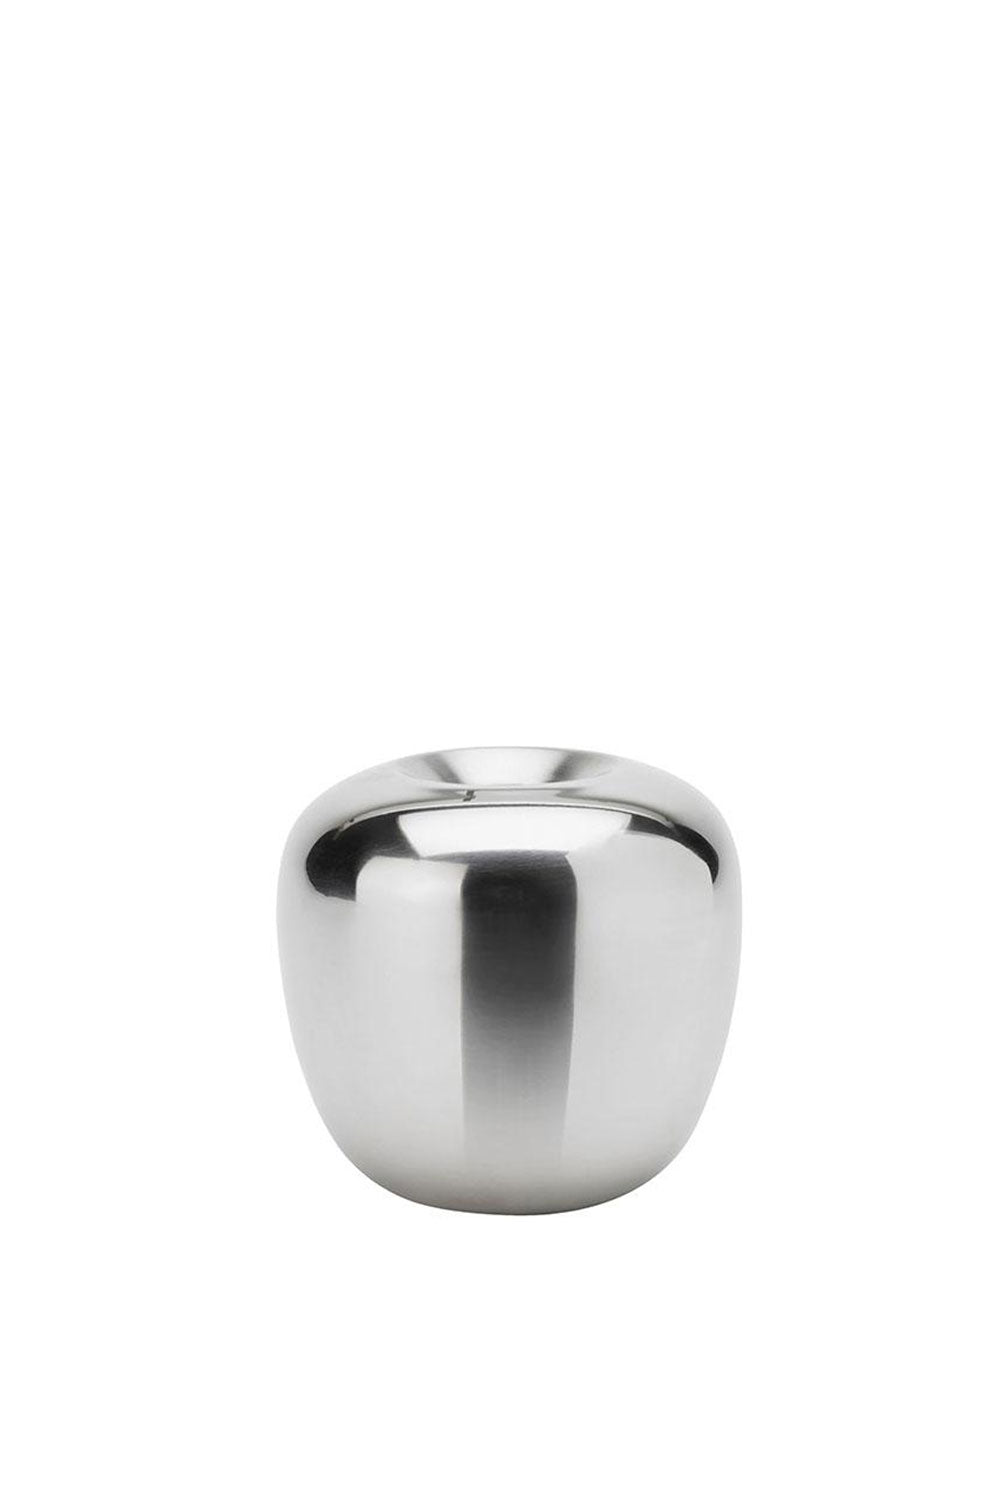 Ora Candle Holder, Small, Steel